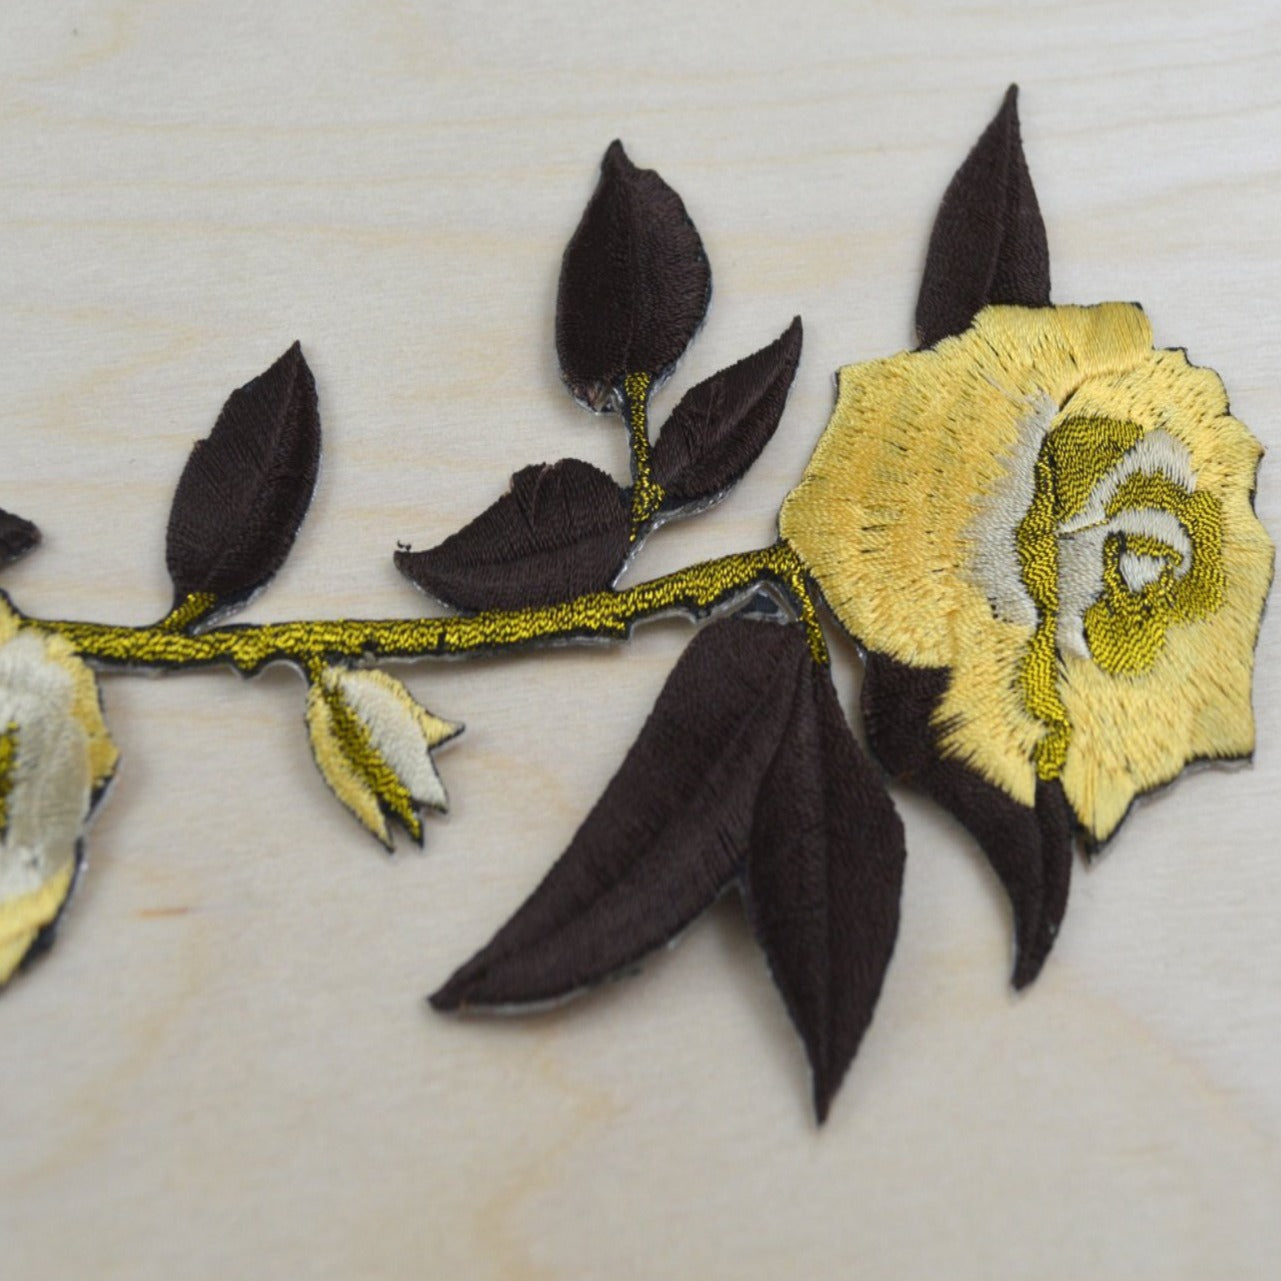 2 Brown and Mustard Long Stem Rose Flower Patch/Applique